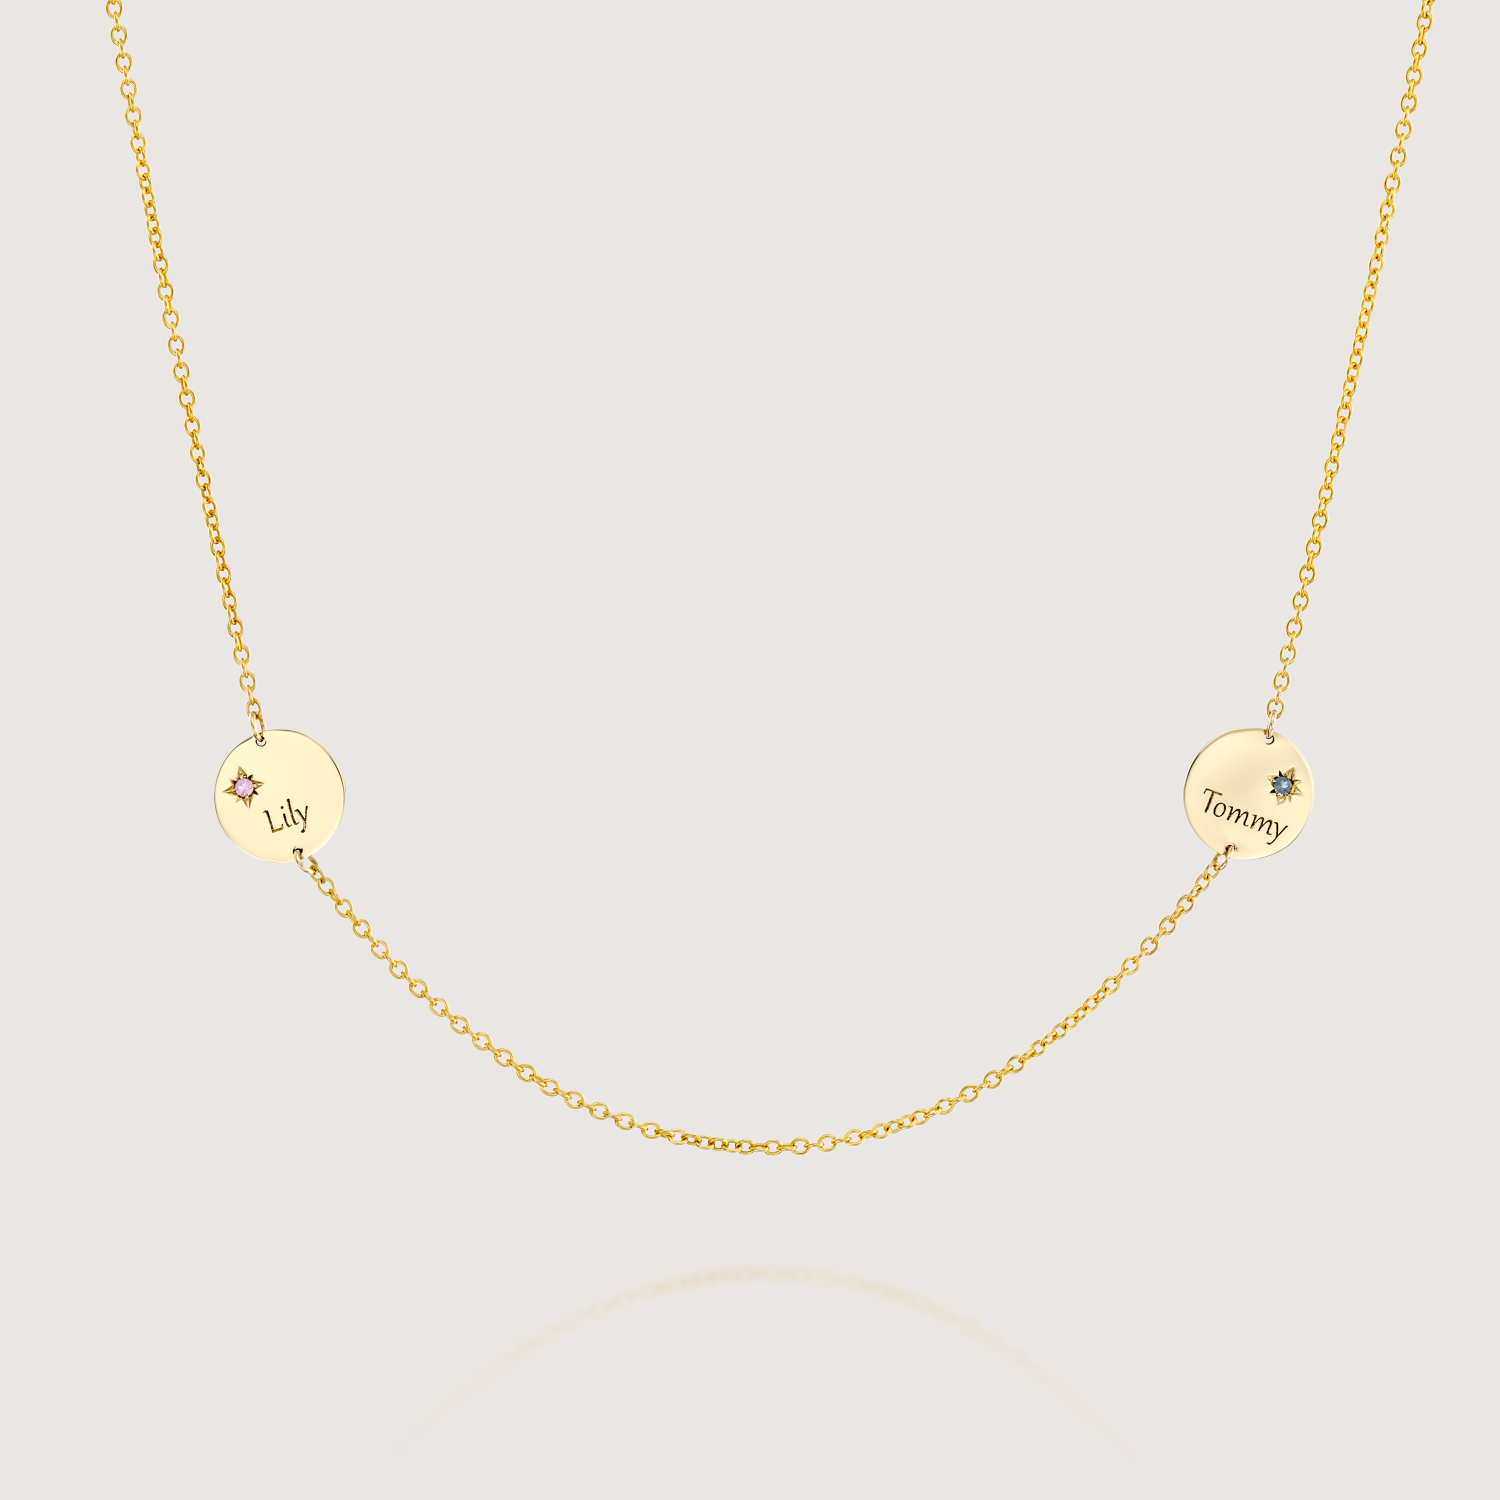 Two Chiara Gold Necklace with Star Setting & Engraving